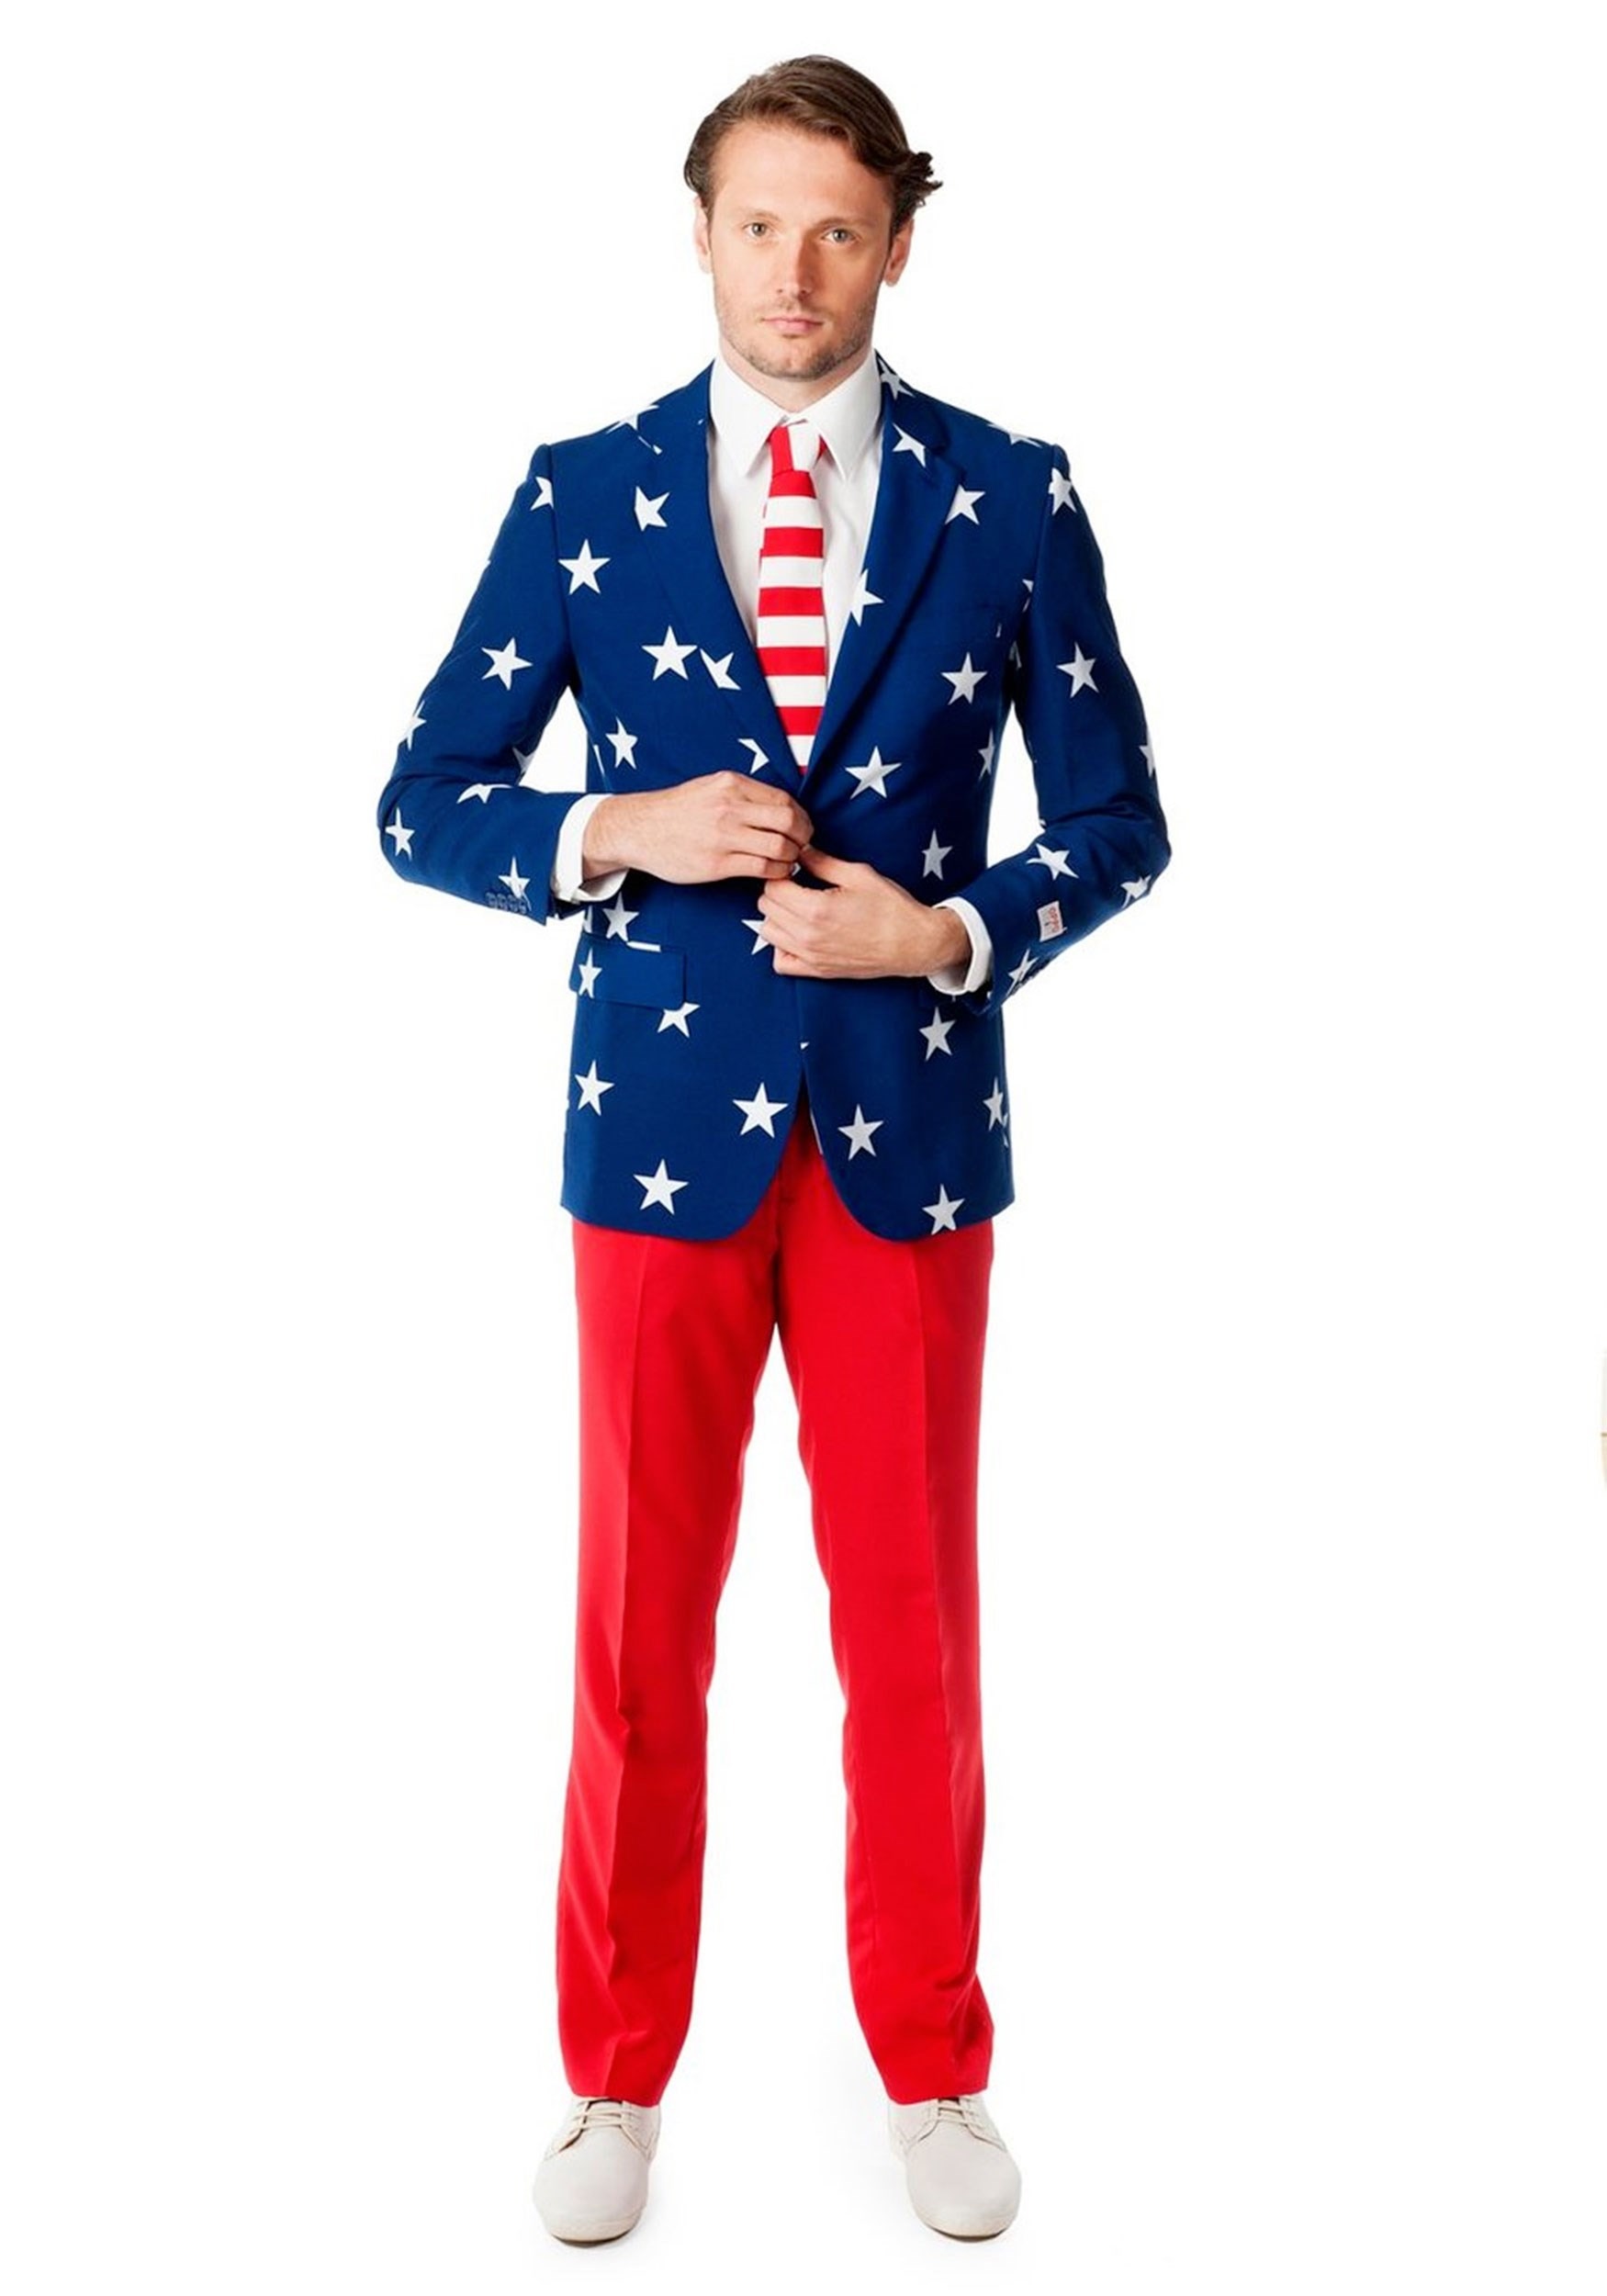 Image of Opposuits Men's OppoSuits Stars and Stripes Costume Suit